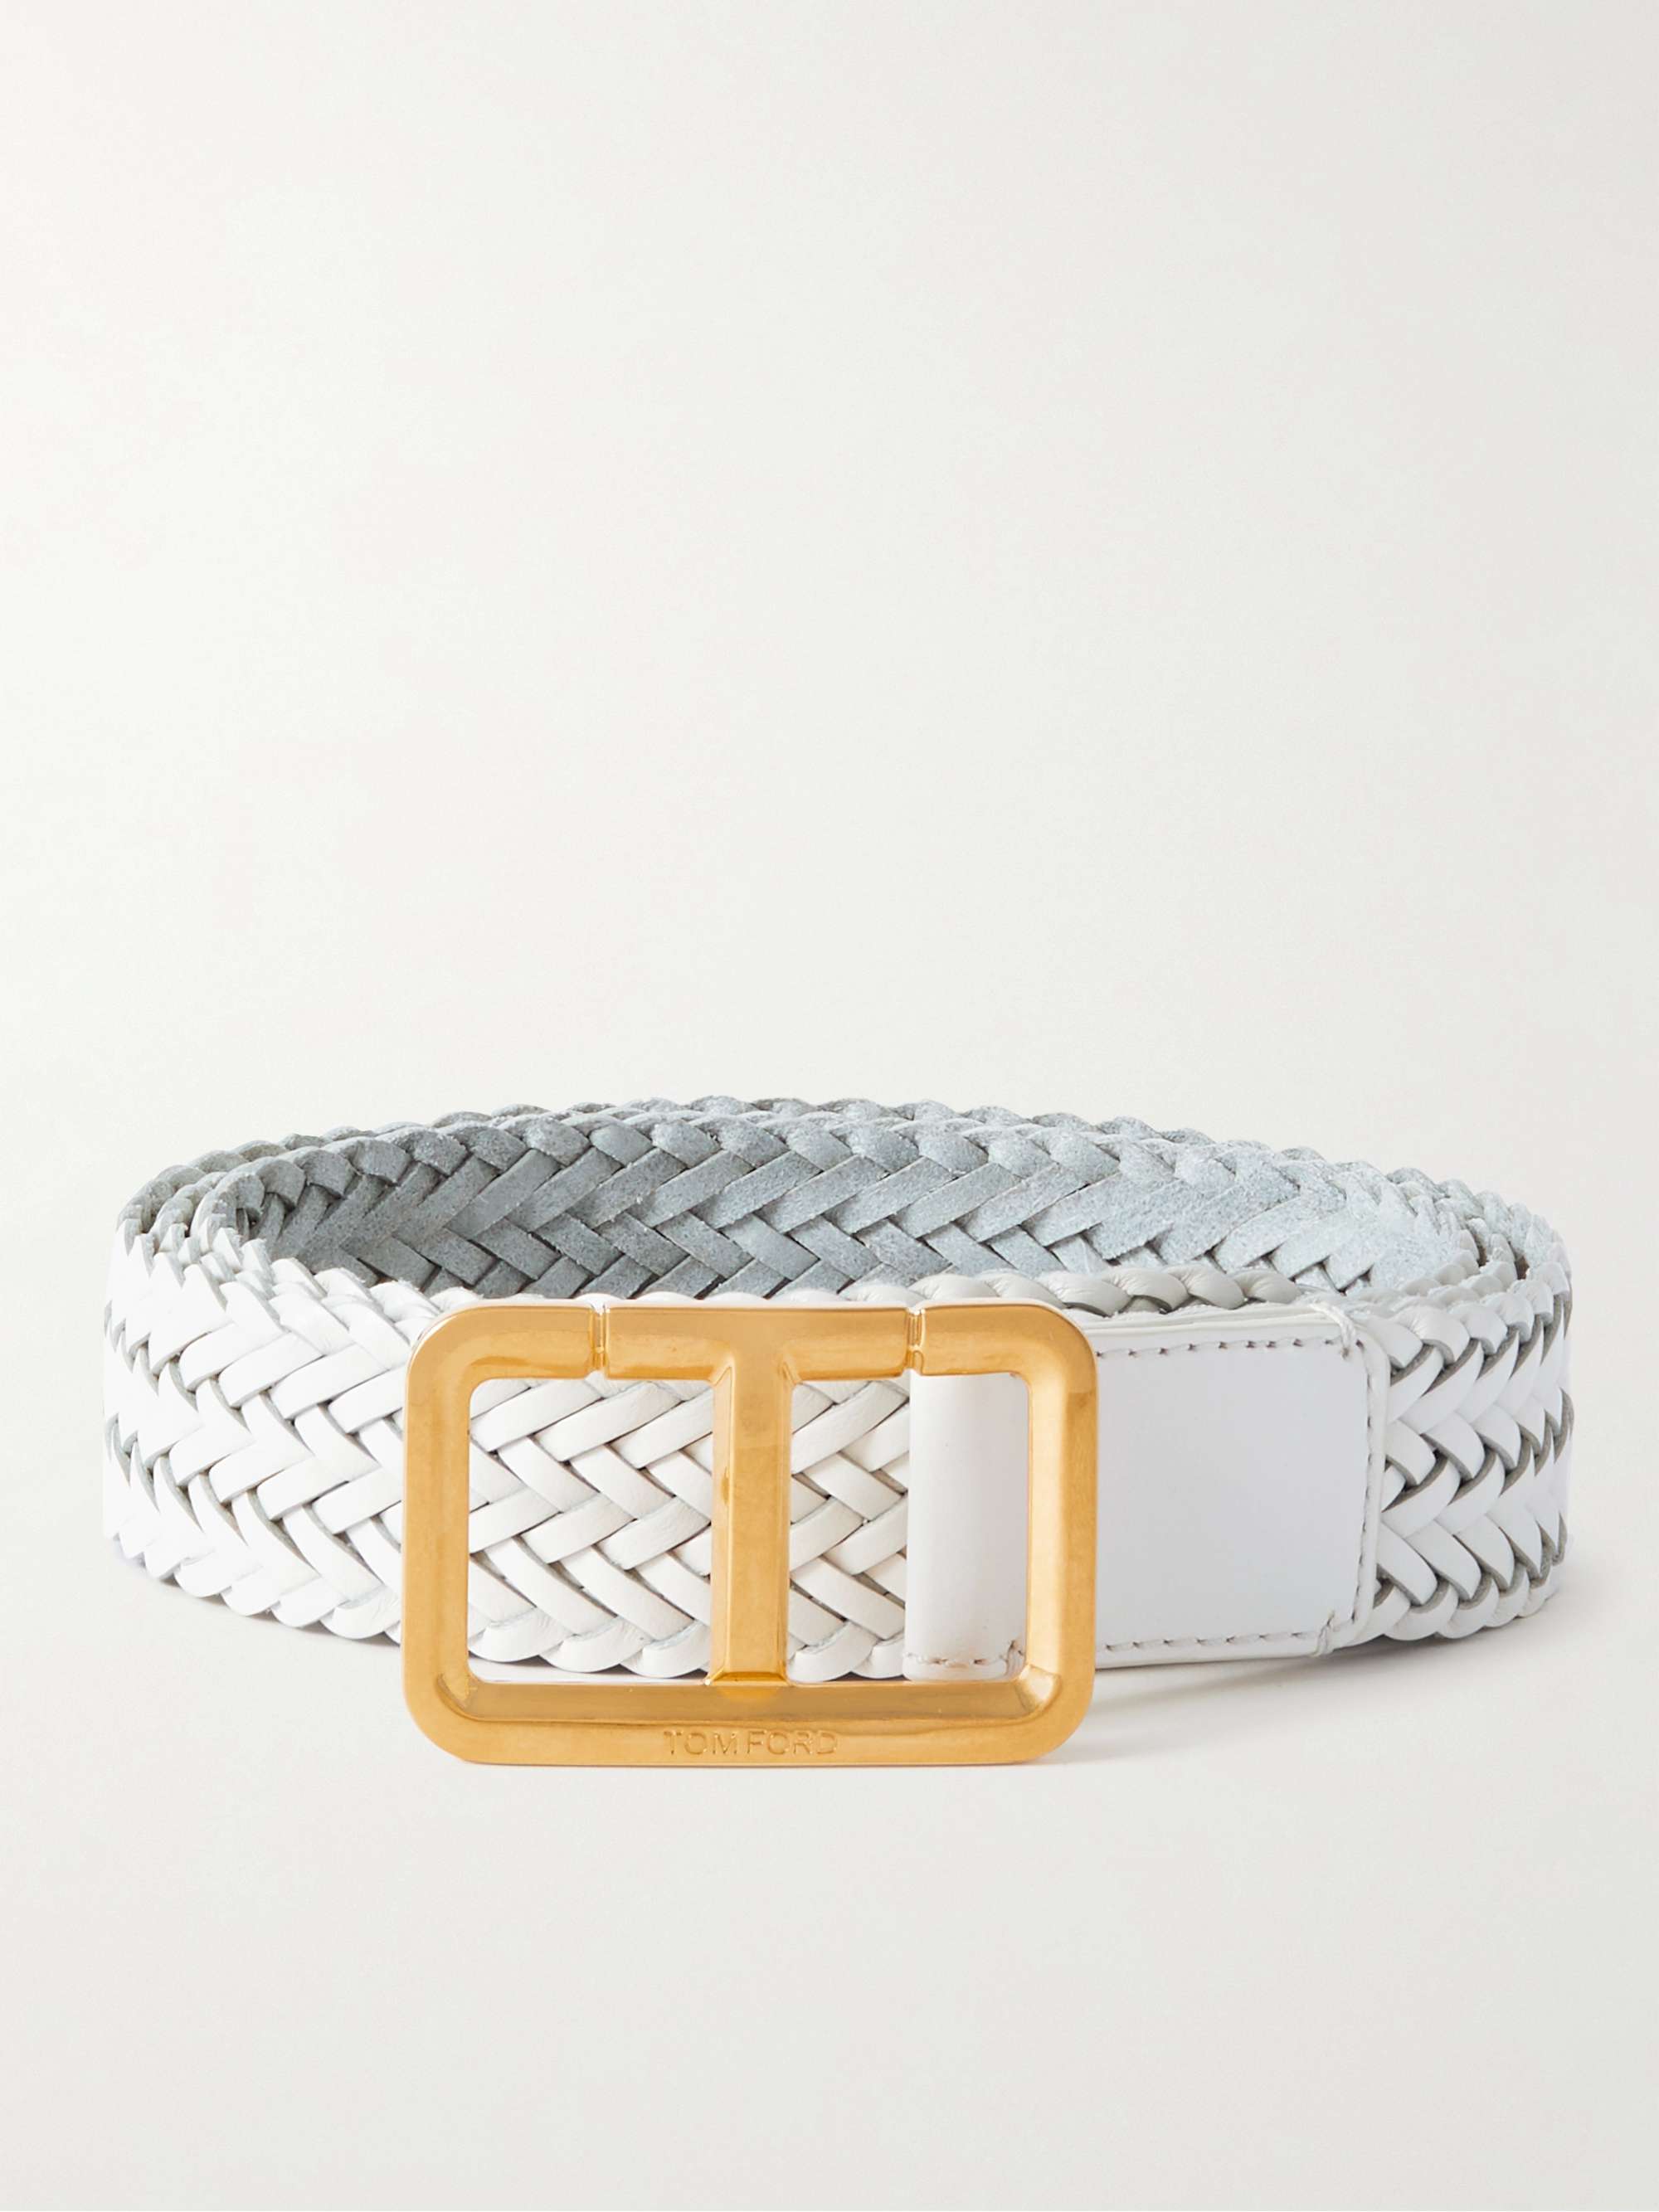 TOM FORD 3cm Woven Leather Belt